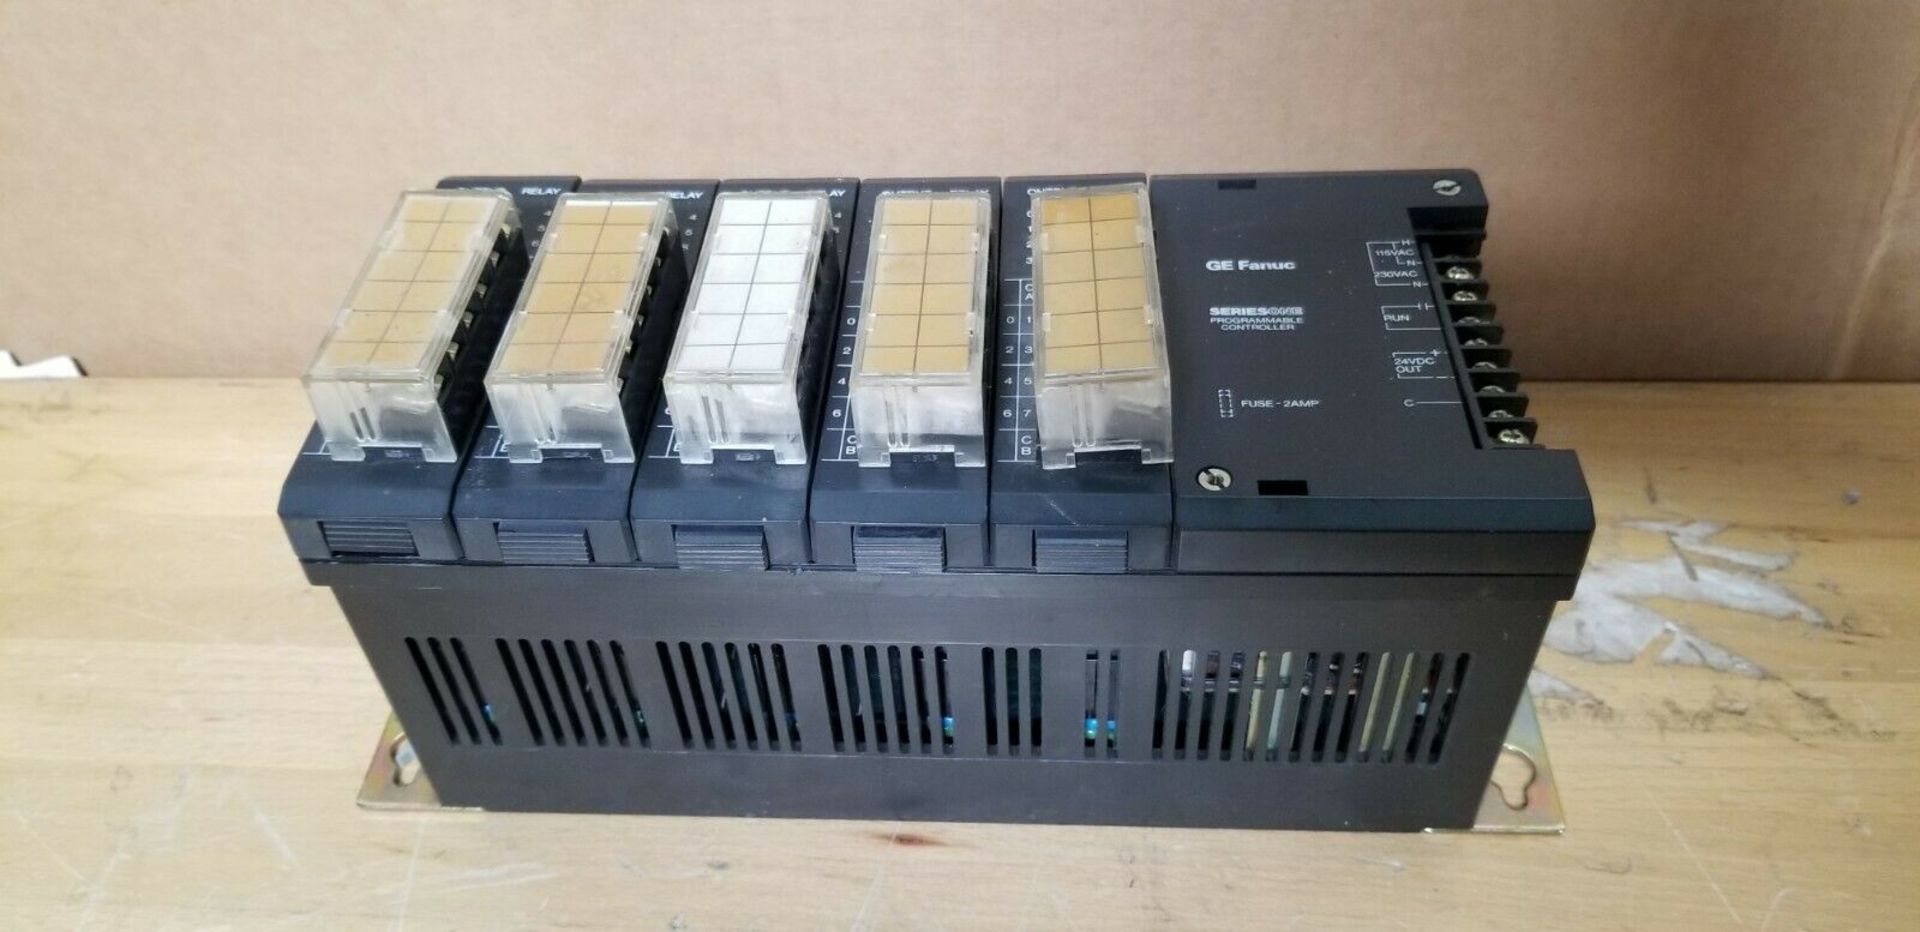 GE SERIES ONE PLC RACK WITH 5 GE FANUC MODULES